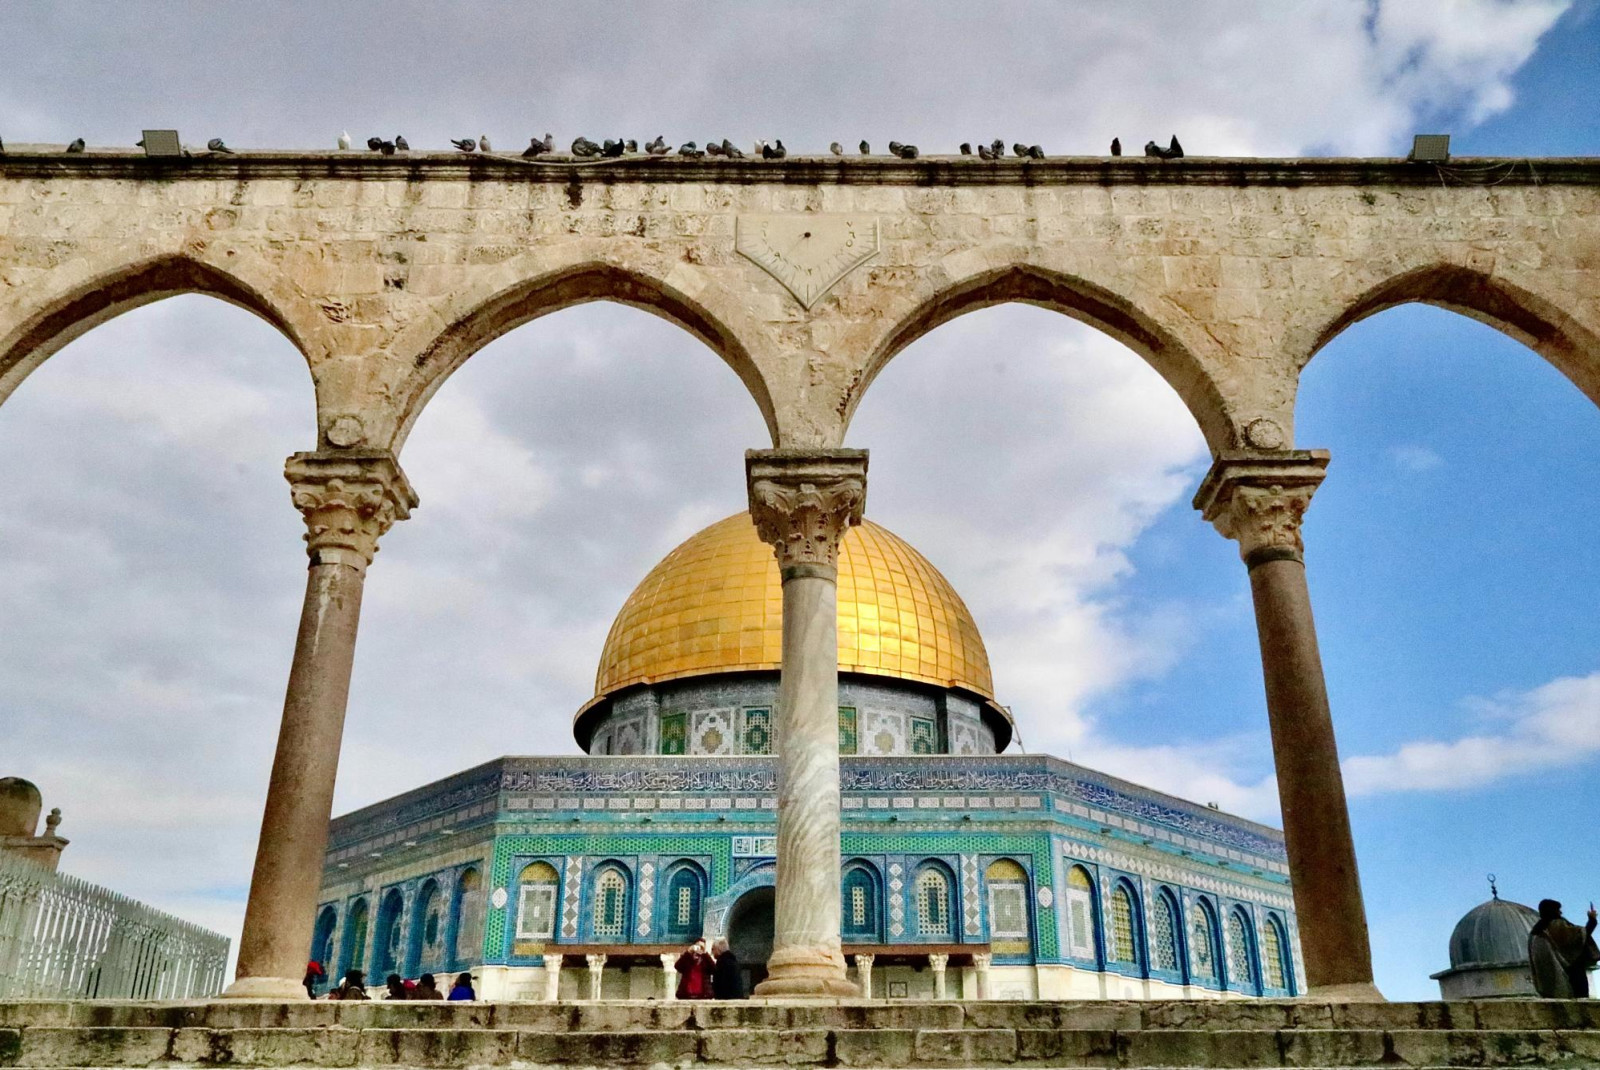 Temple Mount with golden dome with stone arches in front on a sunny day.